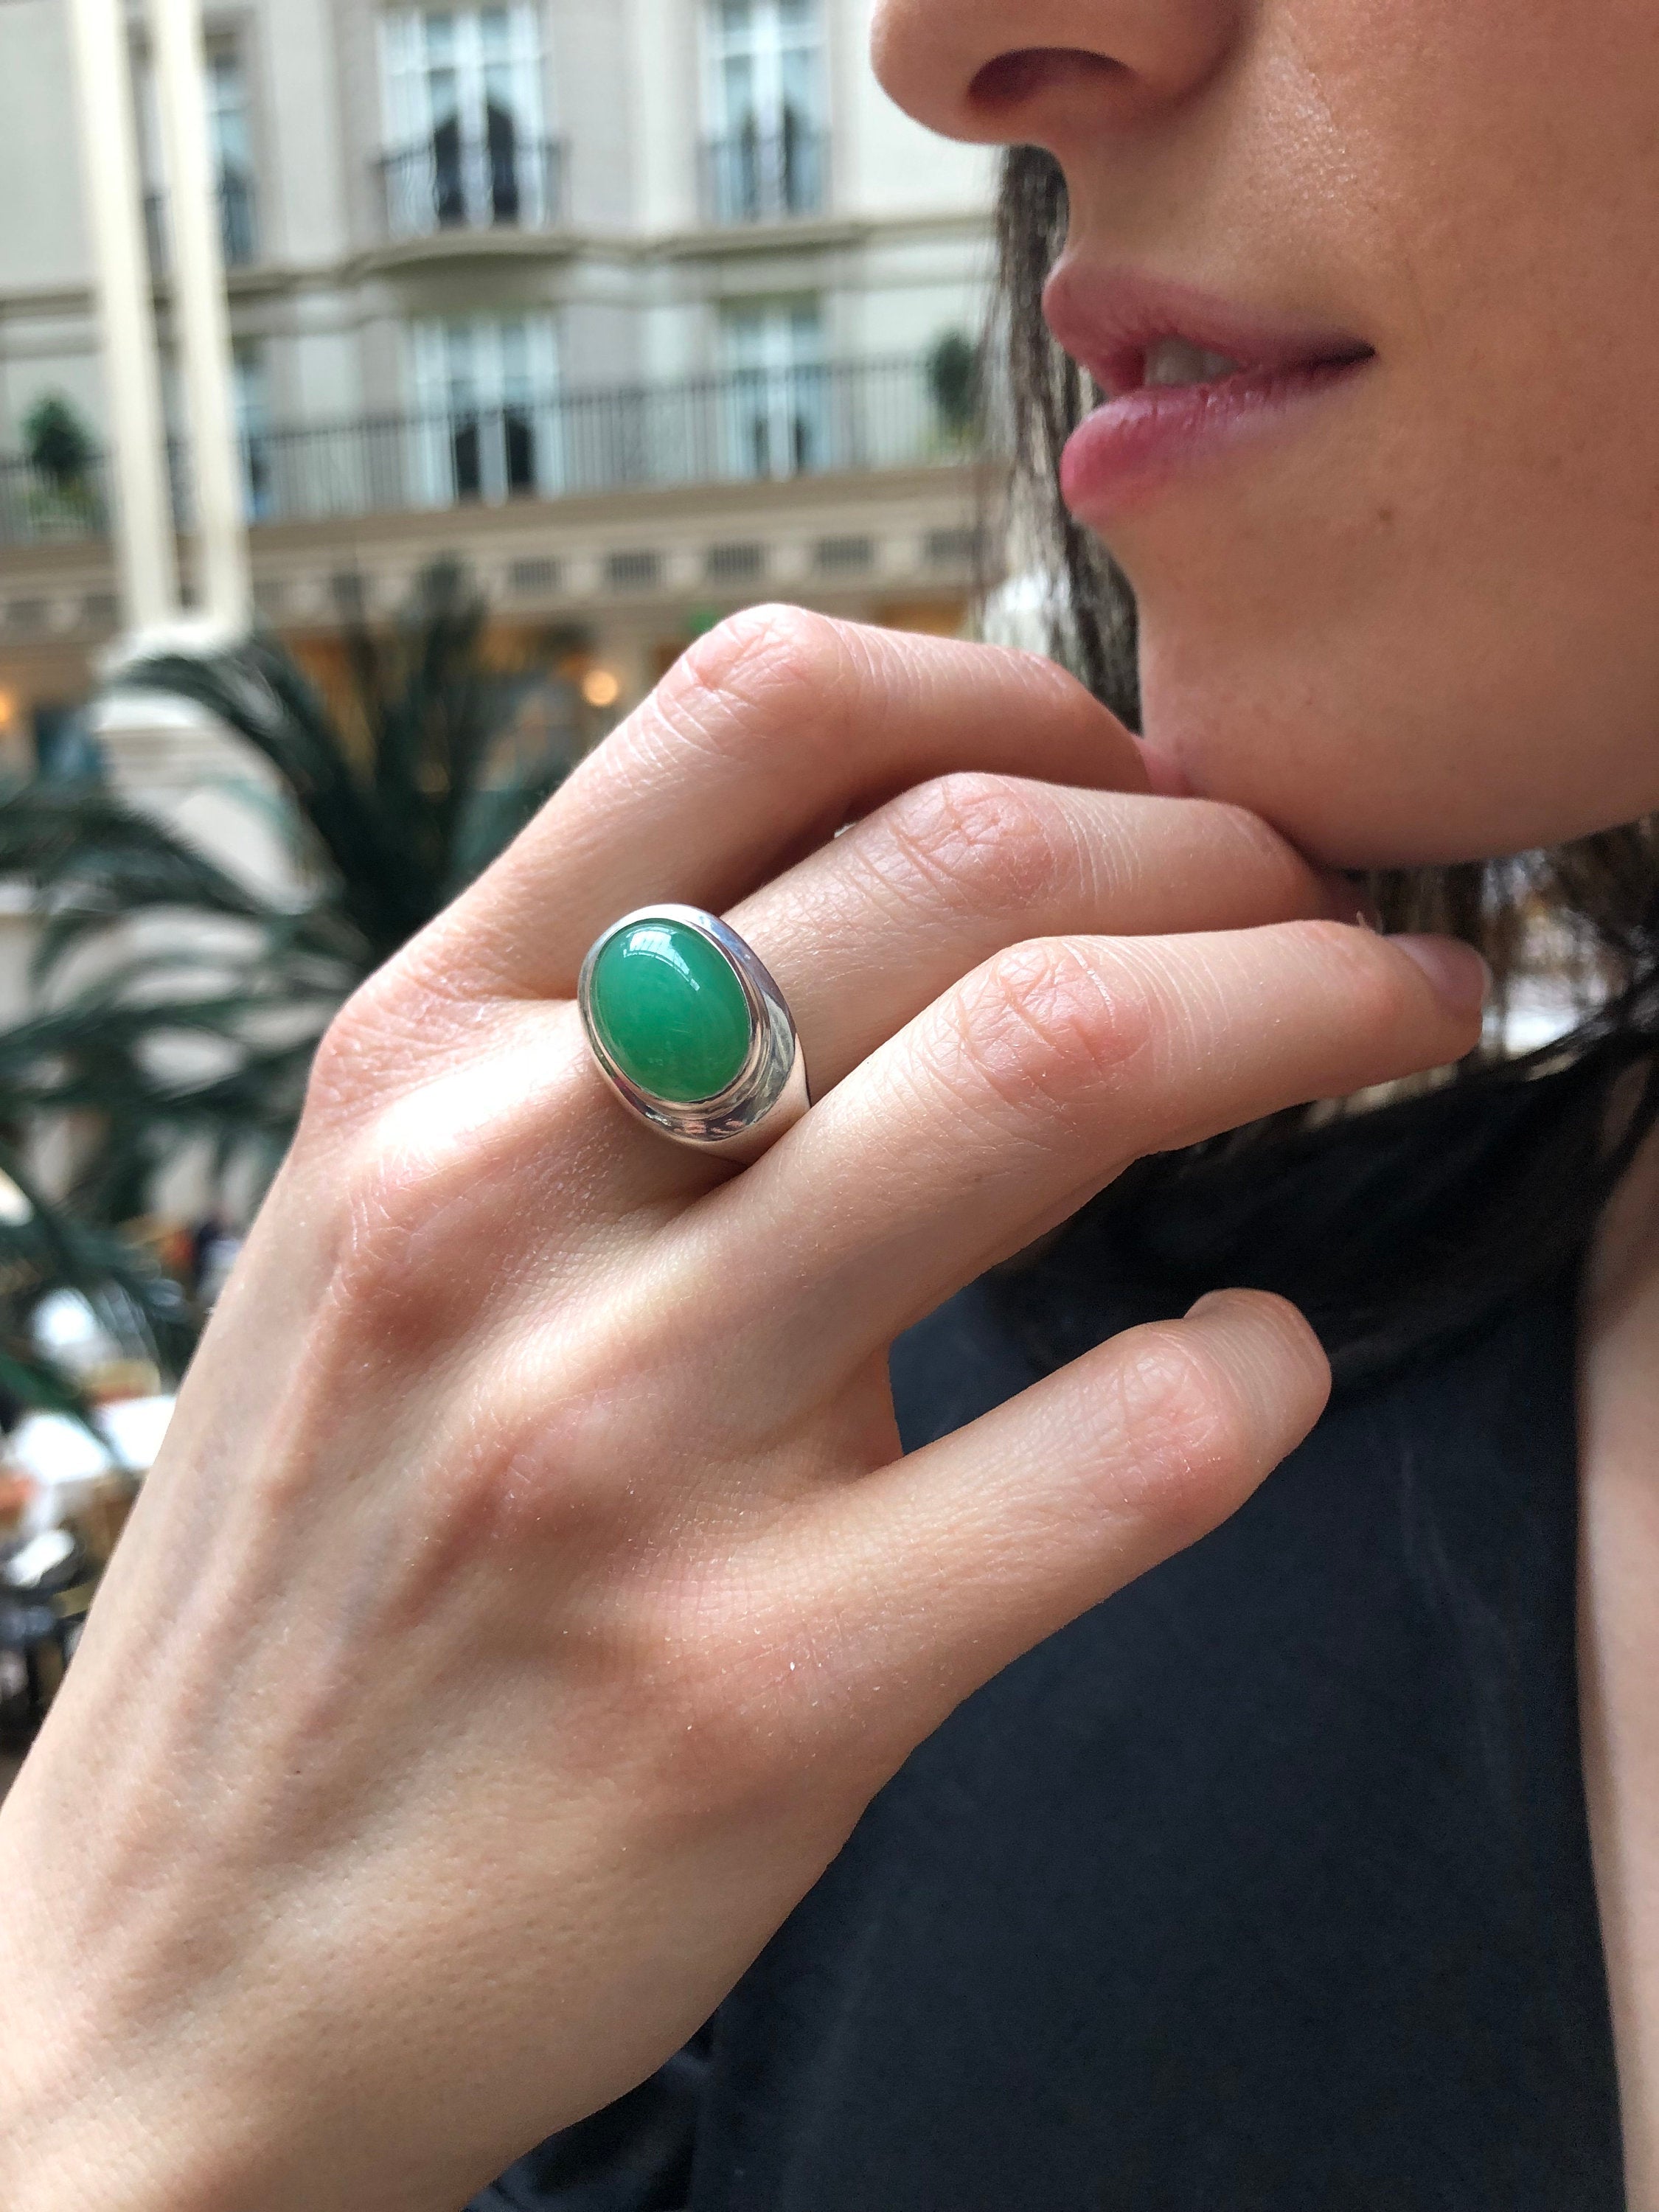 Chrysoprase Ring, Natural Chrysoprase, May Birthstone, Wide Band Ring, Vintage Ring, Statement Ring, Unique Stone Ring, Solid Silver Ring